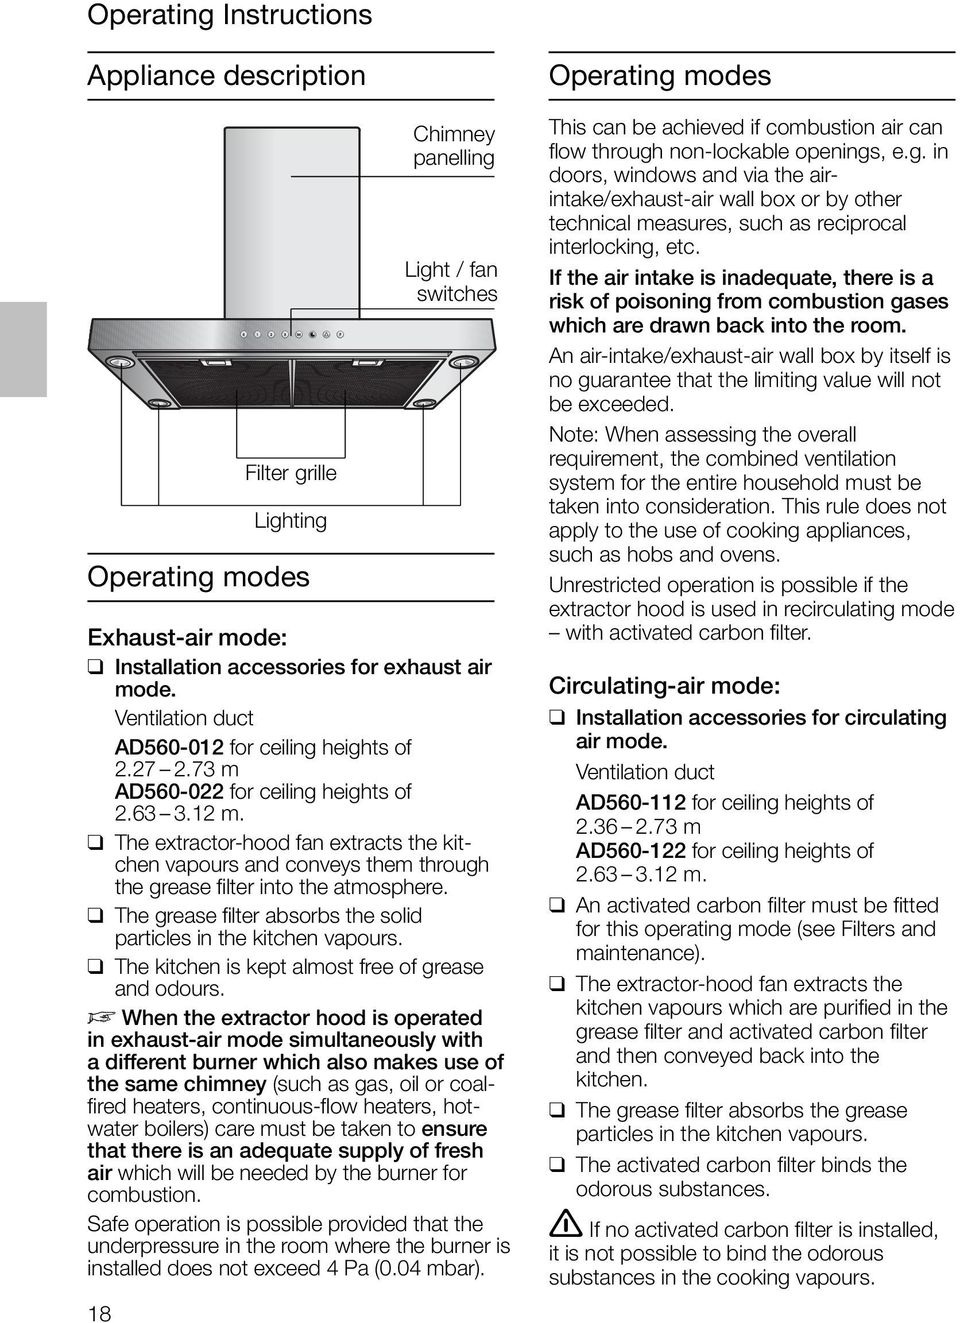 The extractor-hood fan extracts the kitchen vapours and conveys them through the grease filter into the atmosphere. The grease filter absorbs the solid particles in the kitchen vapours.